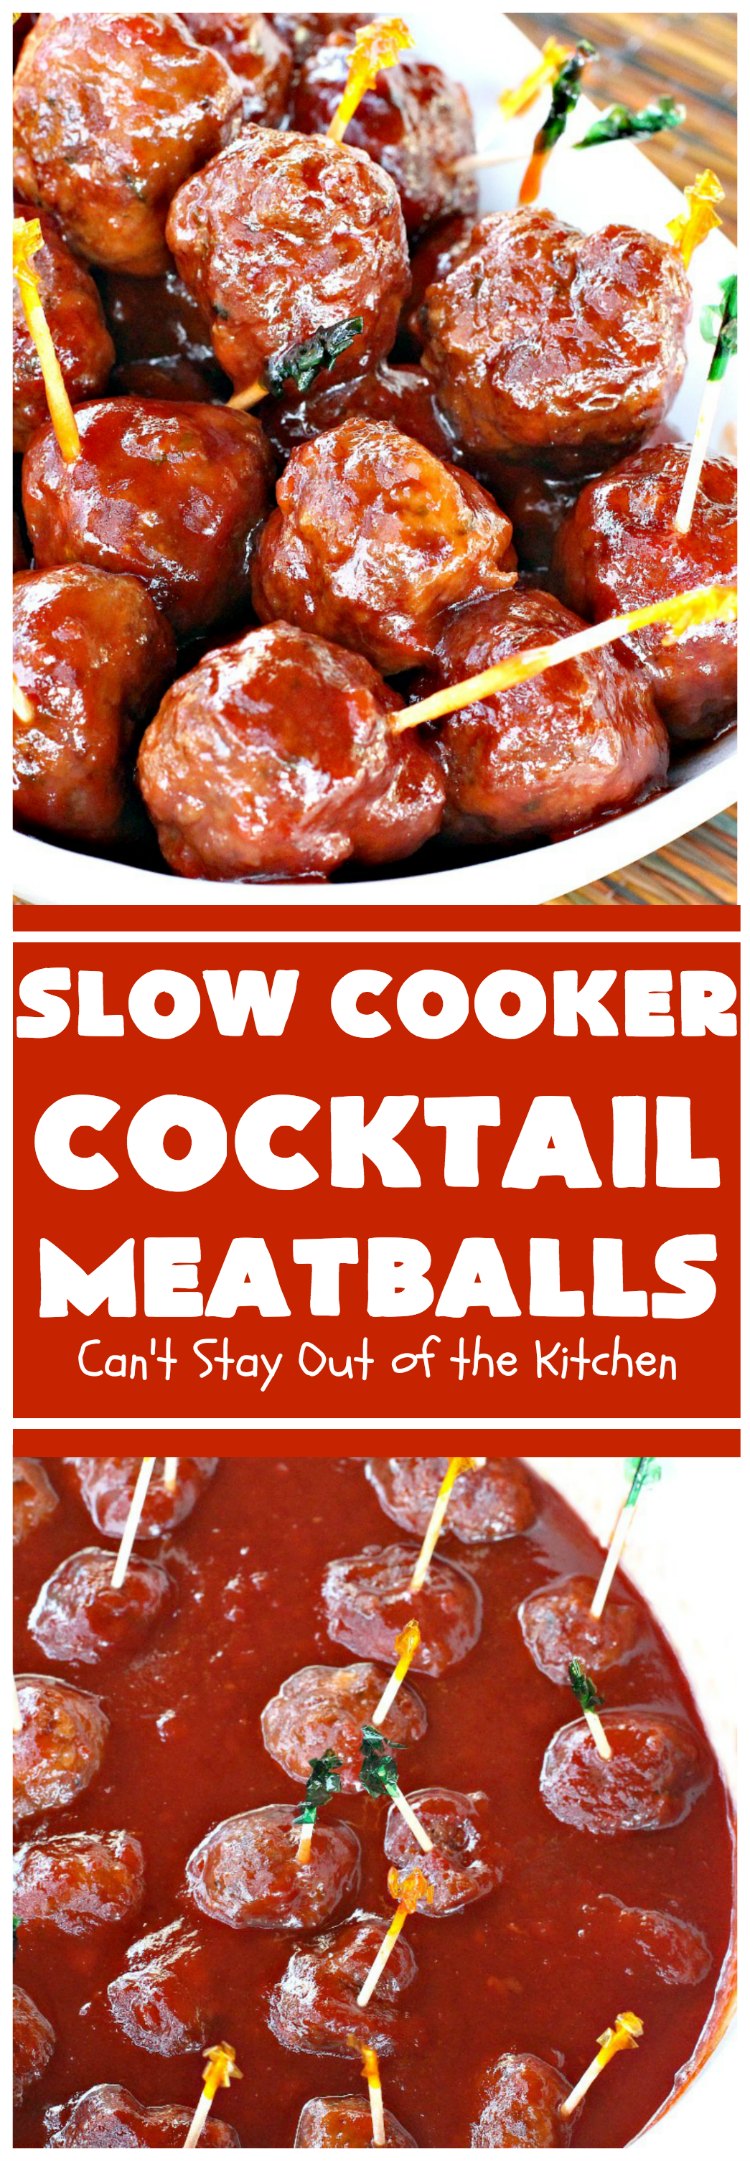 Slow Cooker Cocktail Meatballs | Can't Stay Out of the Kitchen